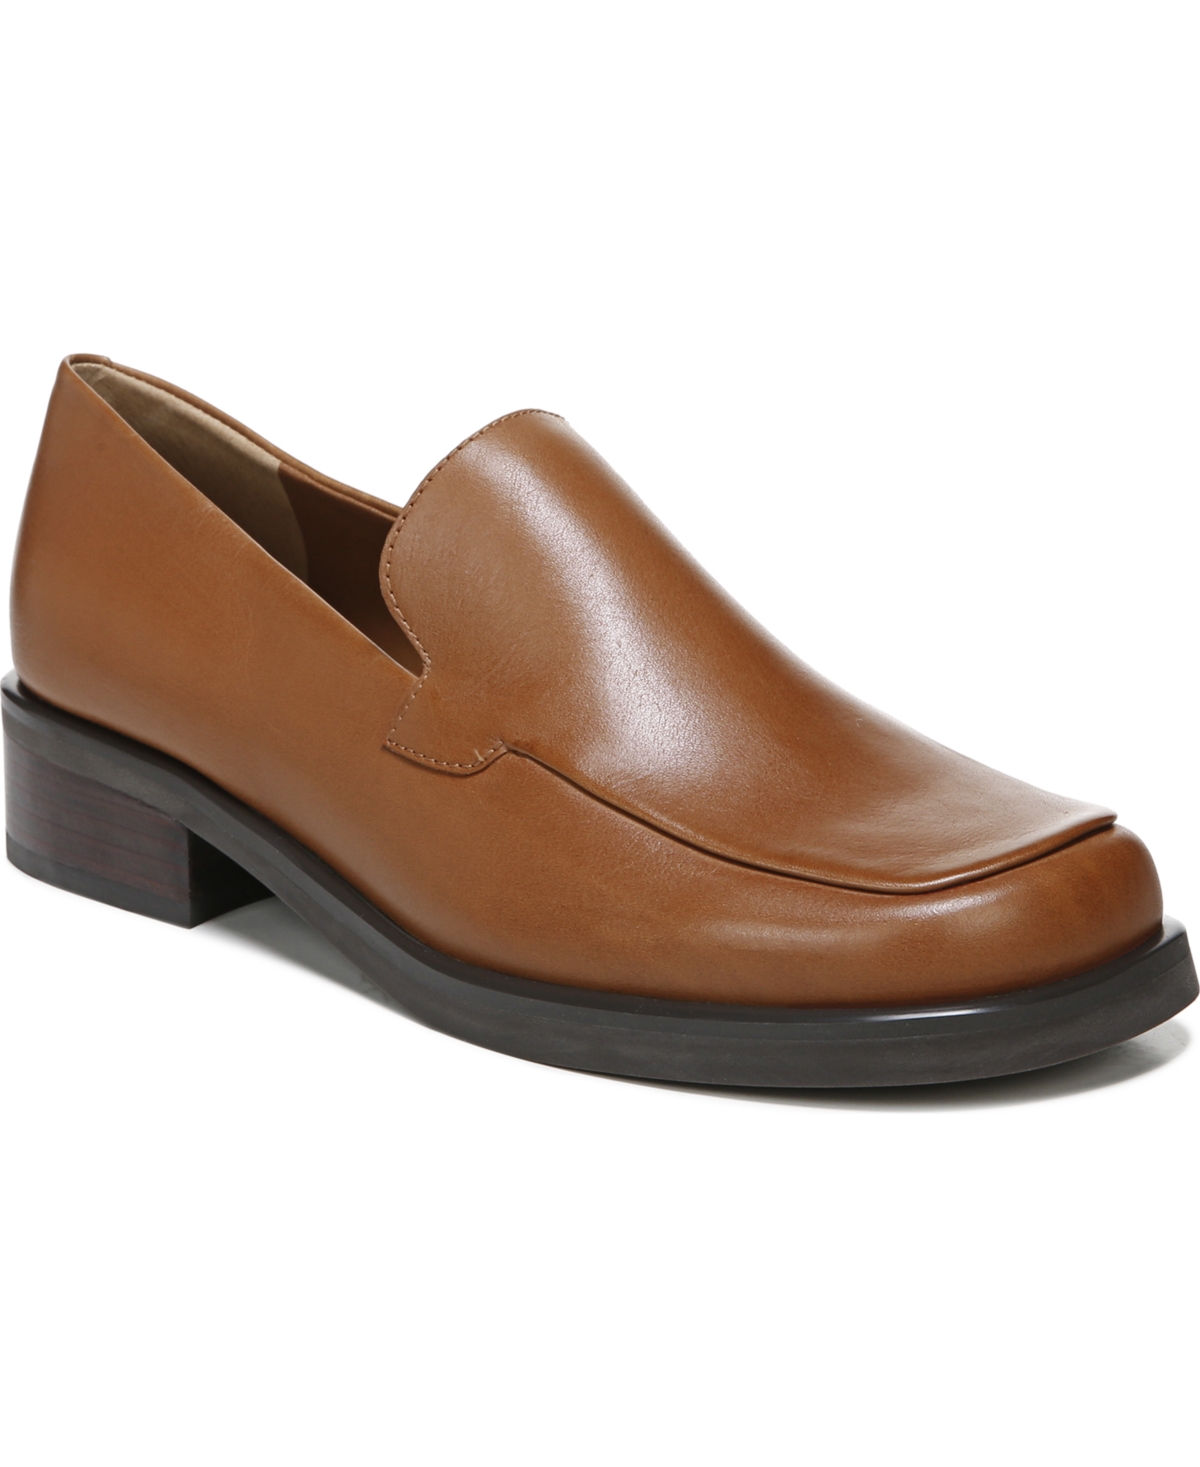 Bocca Slip-on Loafers - Light Brown Leather